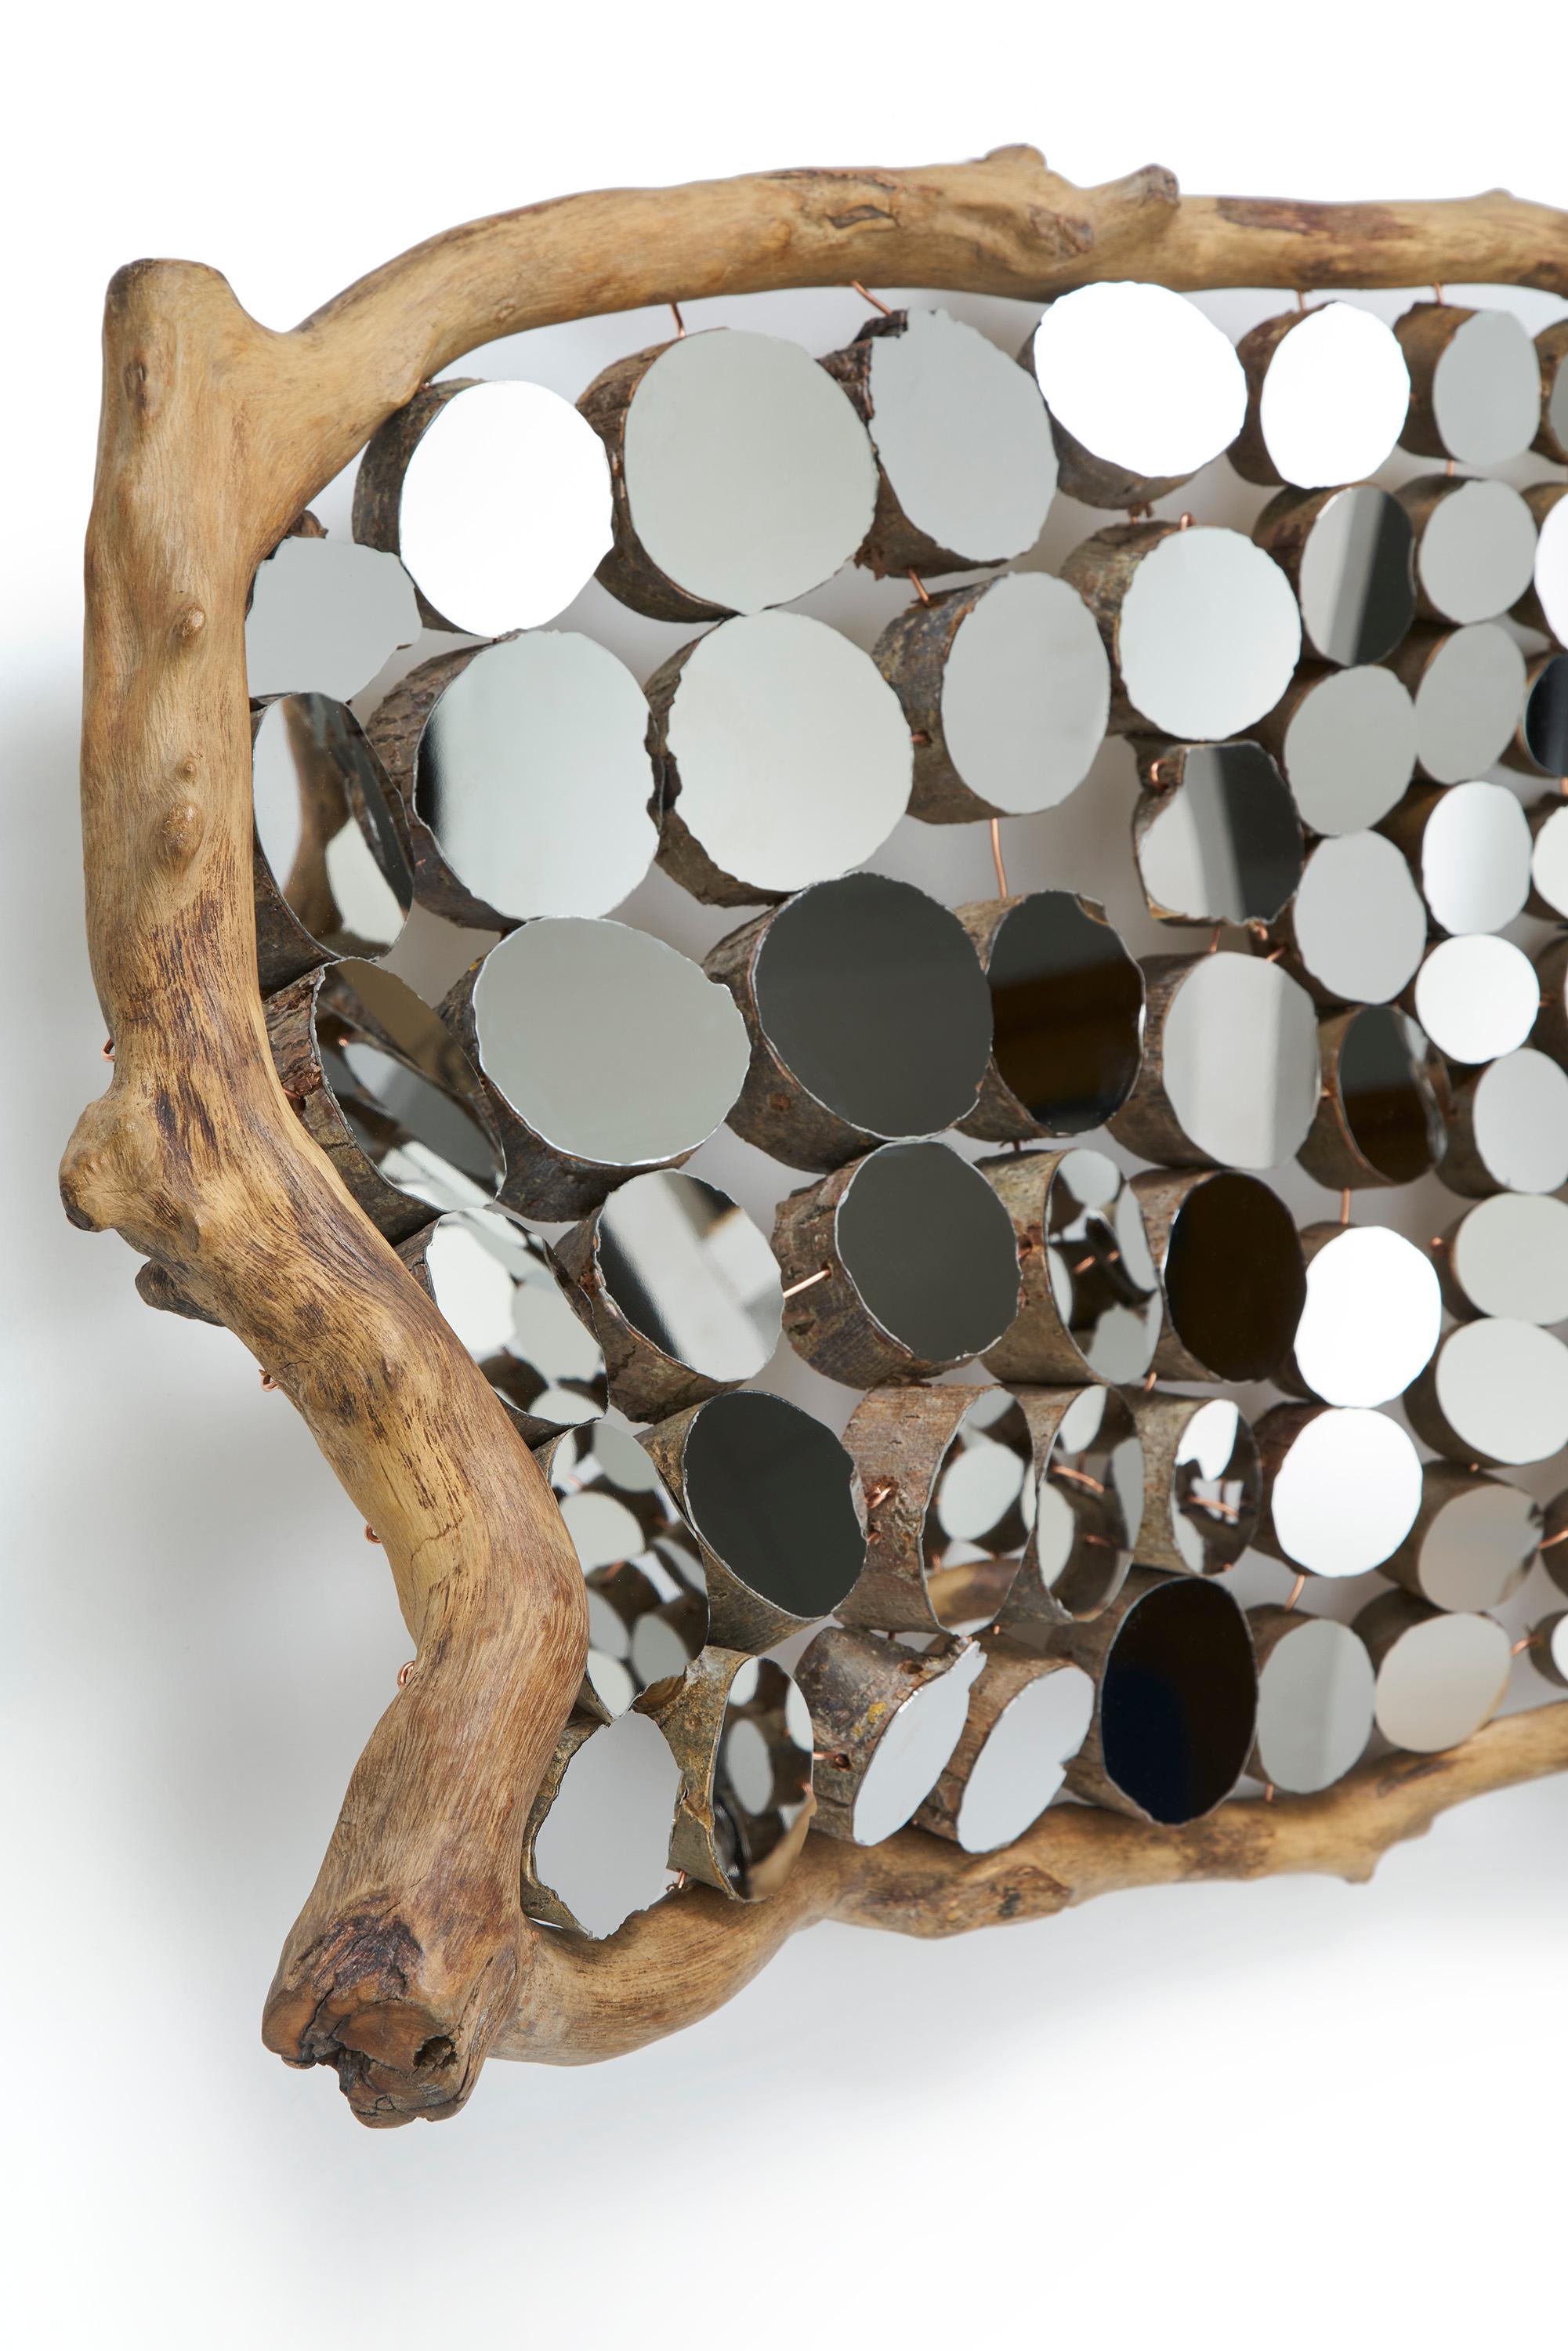 Wandering I: A Sculptural Wall Hanging of Mirrors and Fallen Wood - Contemporary Mixed Media Art by Lee Borthwick